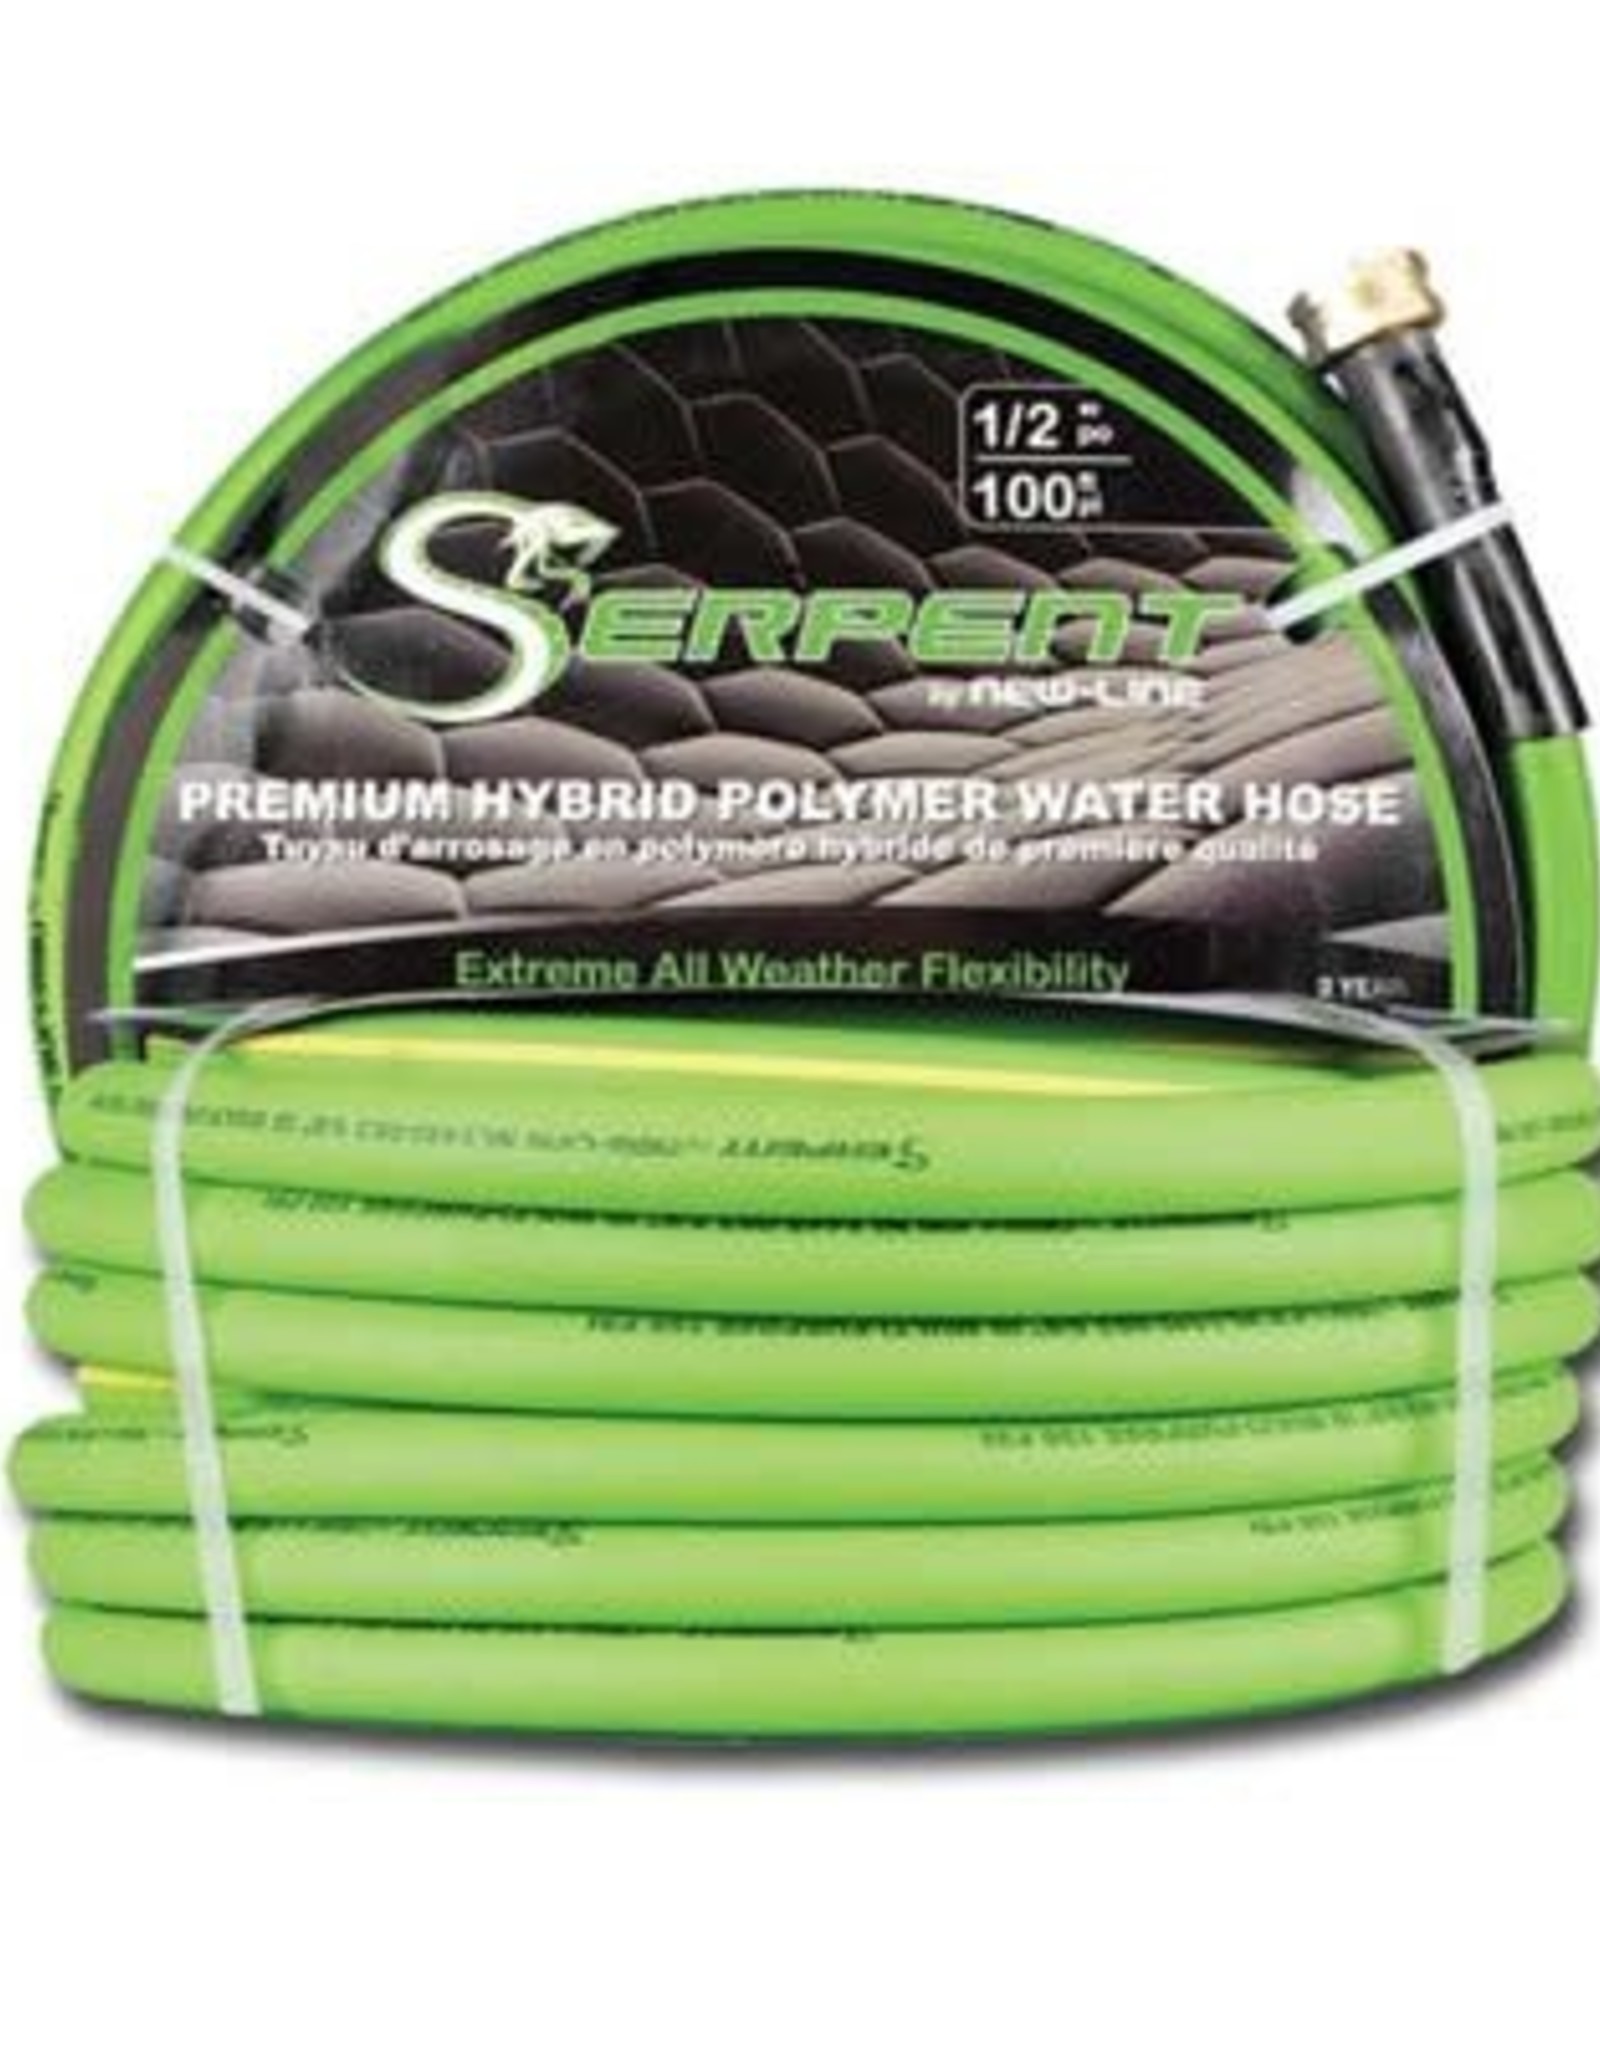 5/8 x 50 ft. Green Serpent Garden Hose 150PSI with MxF GHT